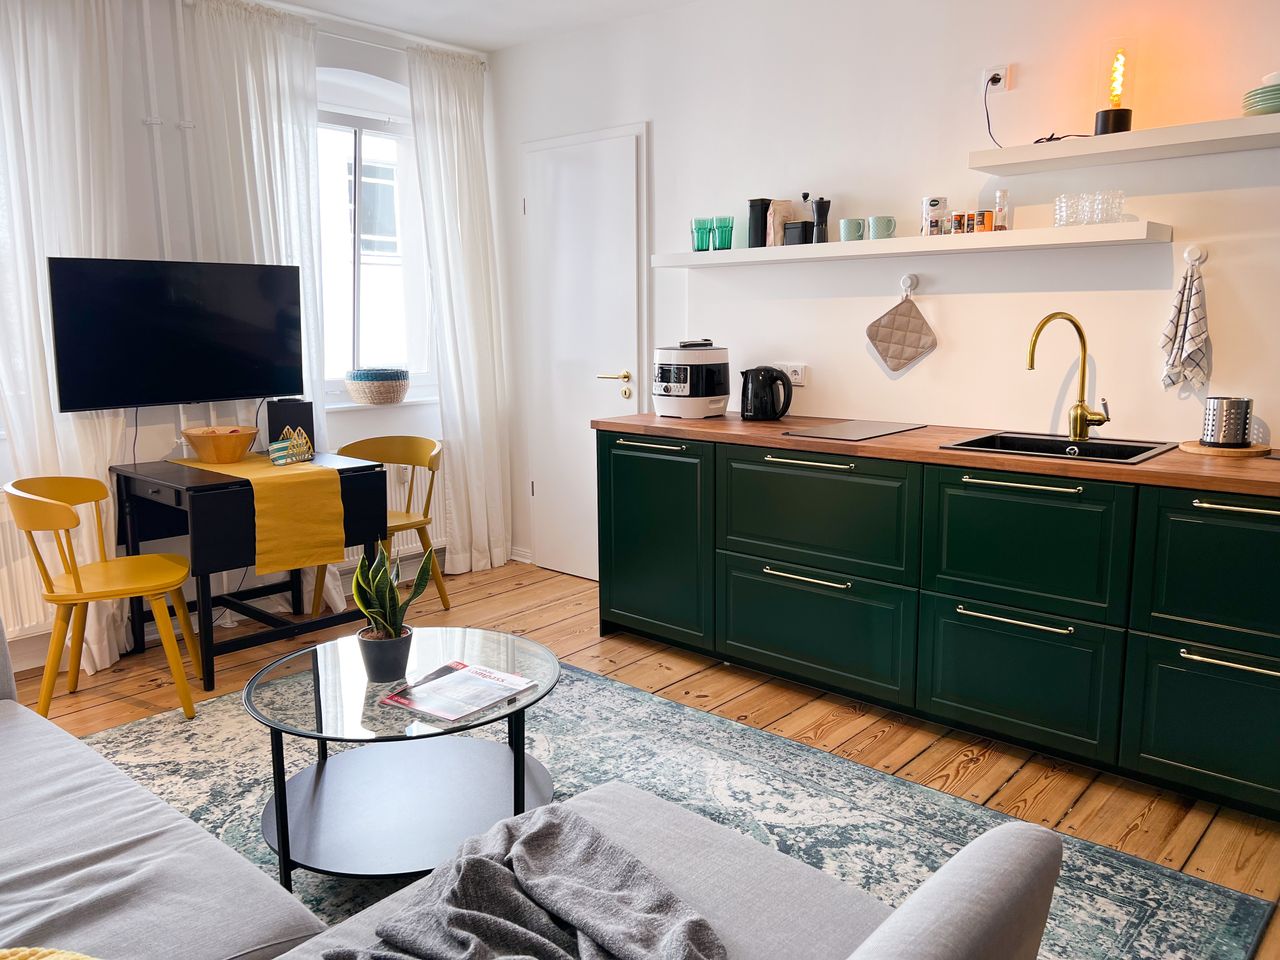 Your Nest in Mitte - 1 bedroom 1 bath fully furnished / all inclusive